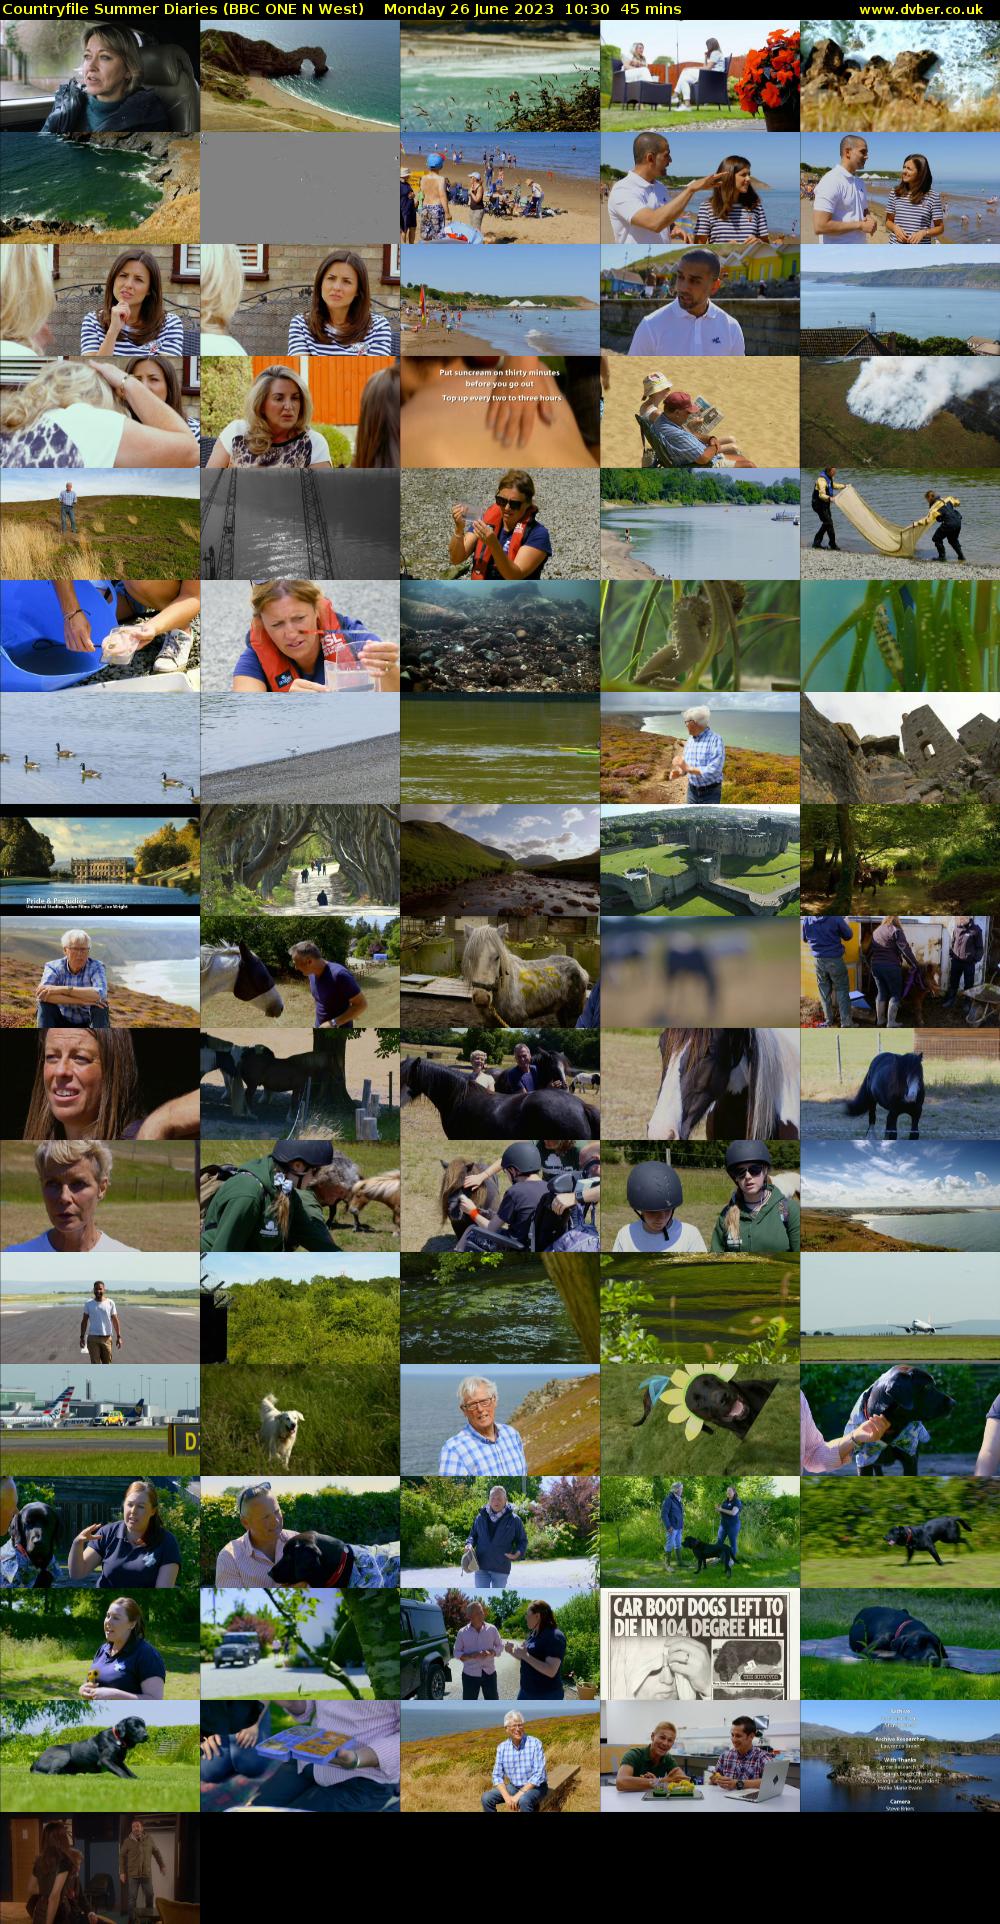 Countryfile Summer Diaries (BBC ONE N West) Monday 26 June 2023 10:30 - 11:15